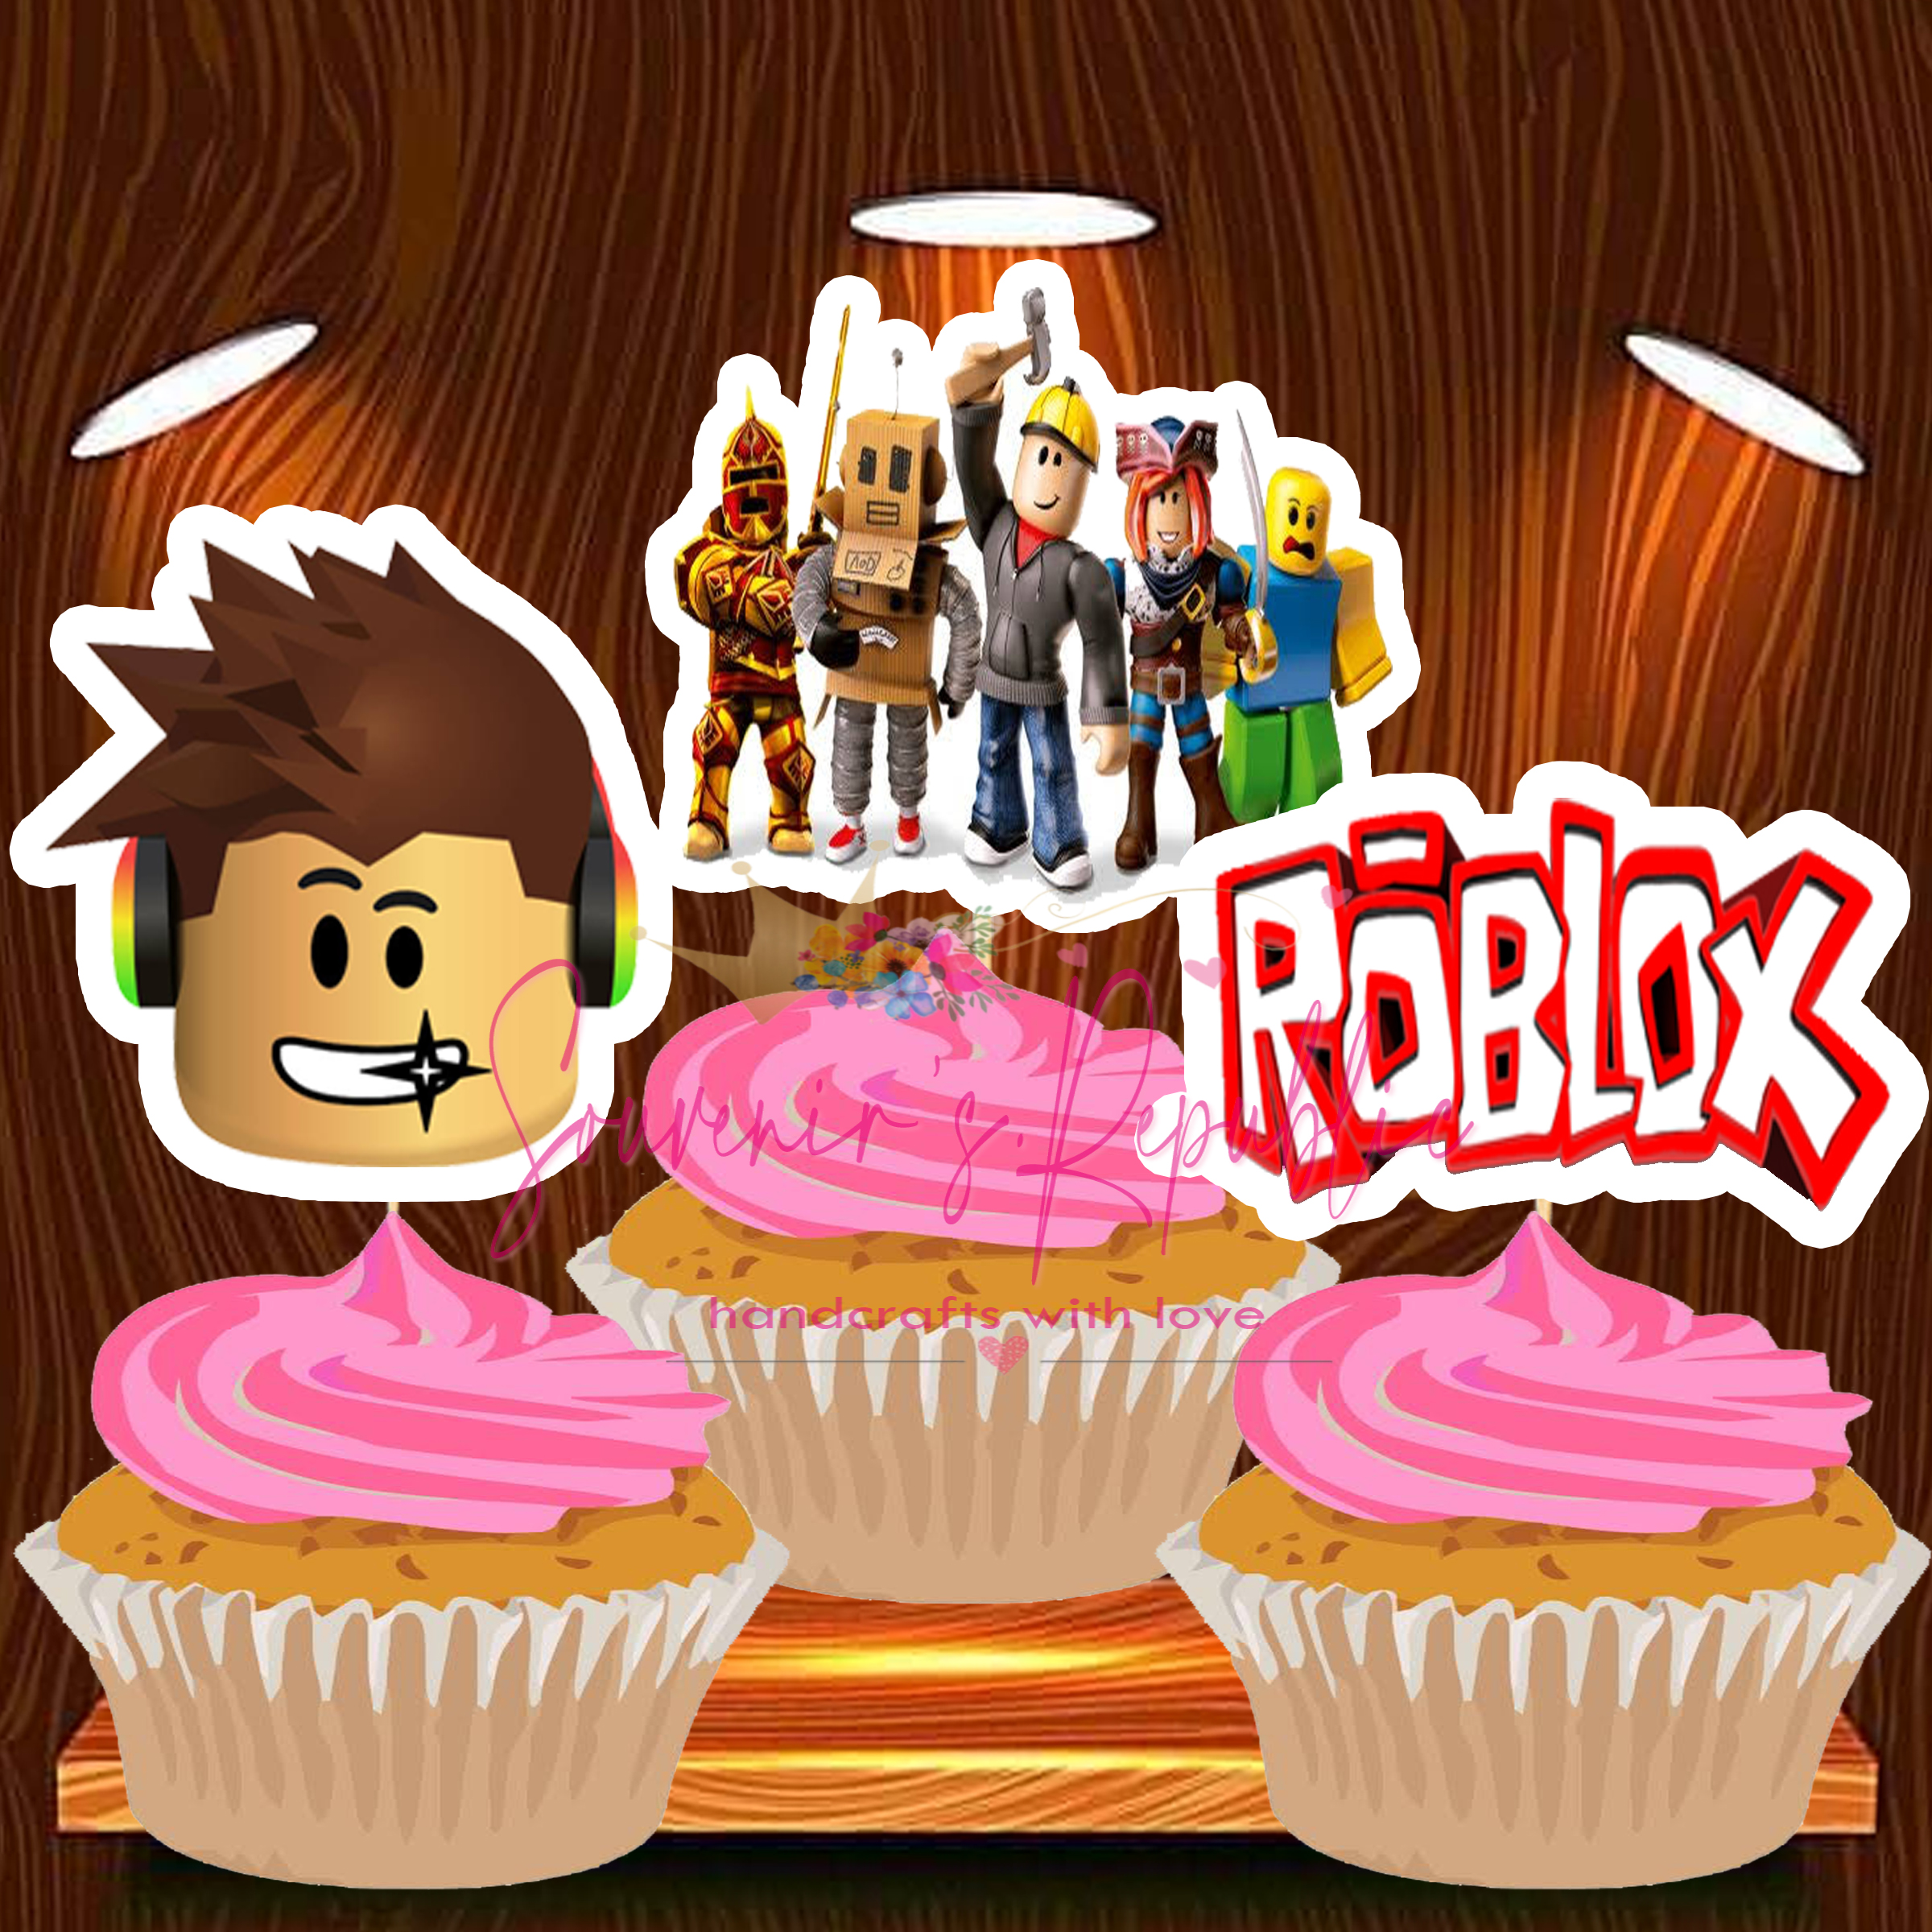 Roblox Cupcake Topper 24 Pcs Buy Sell Online Cake Tiered Stands With Cheap Price Lazada Ph - roblox cupcake